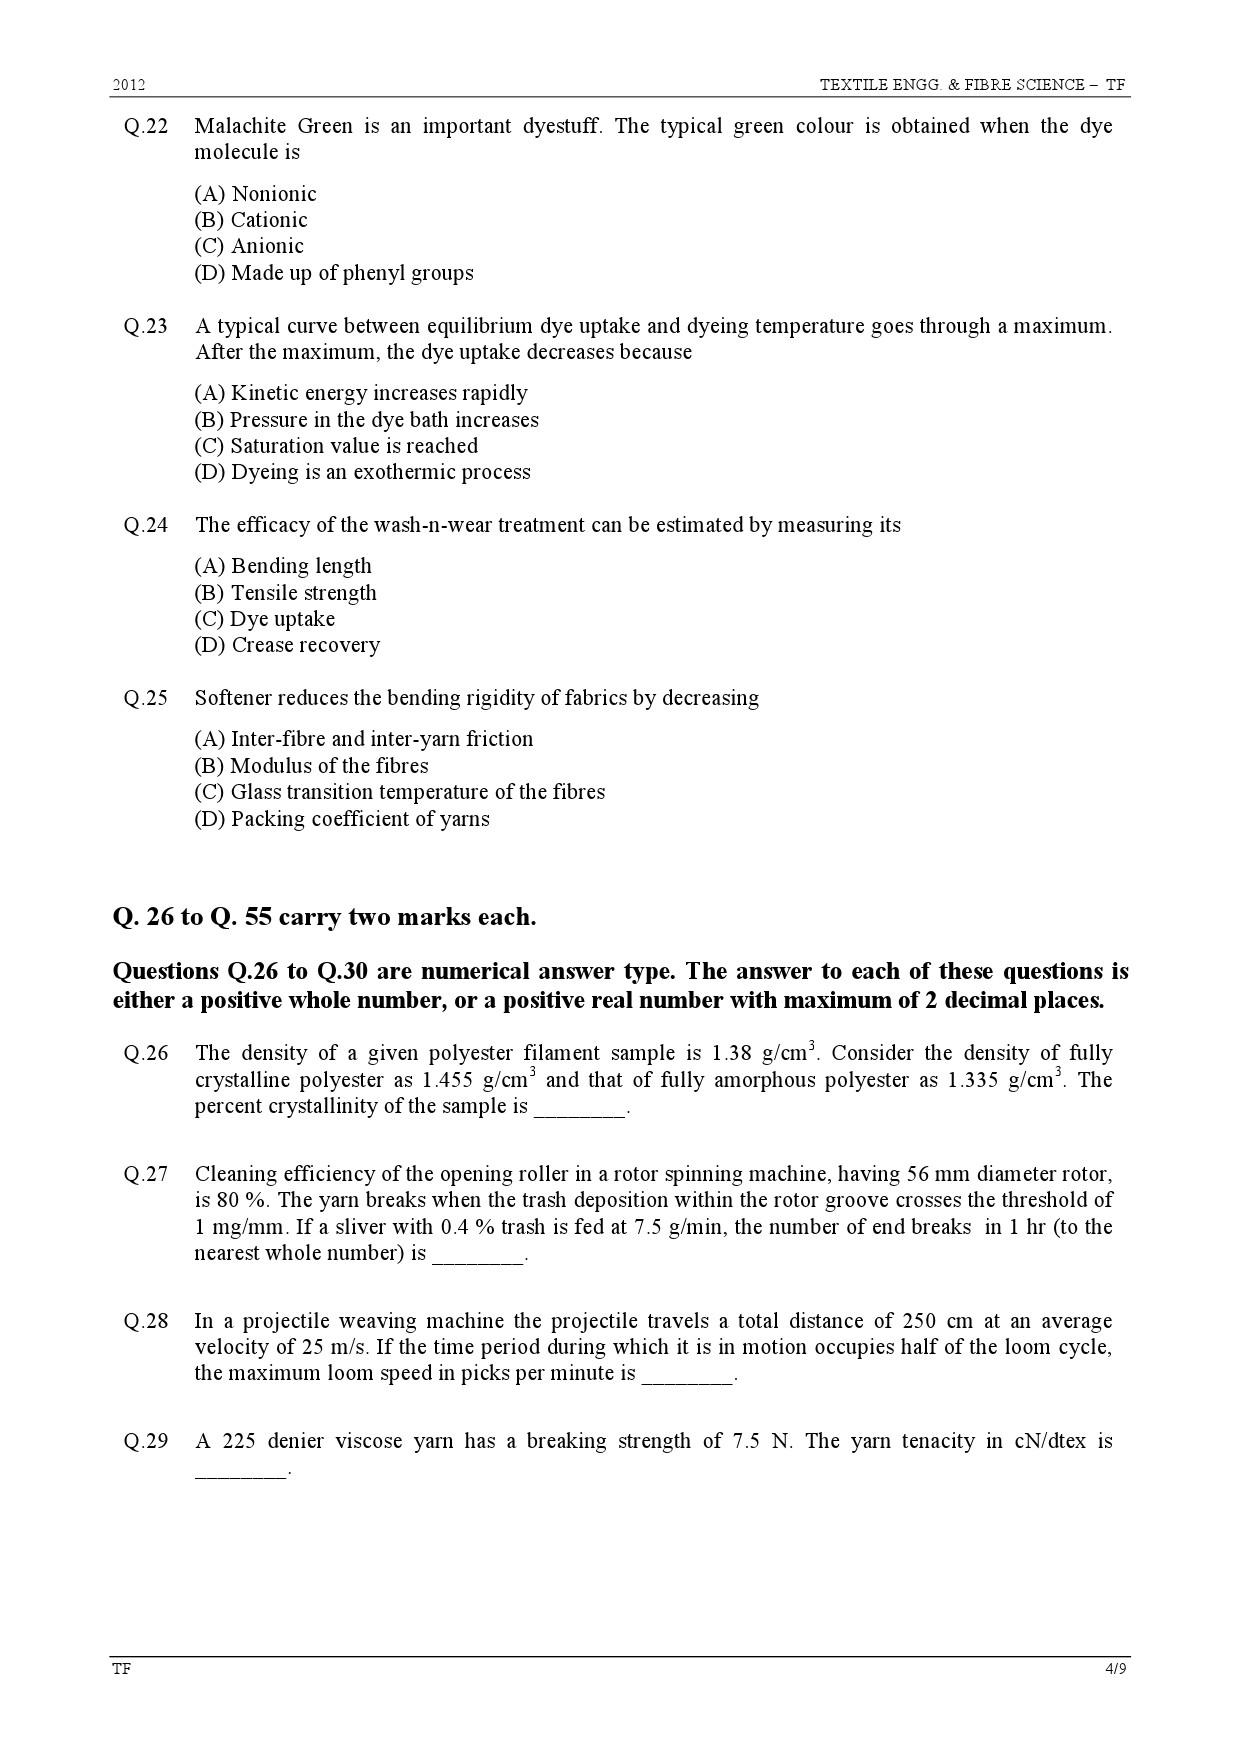 GATE Exam Question Paper 2012 Textile Engineering and Fibre Science 4